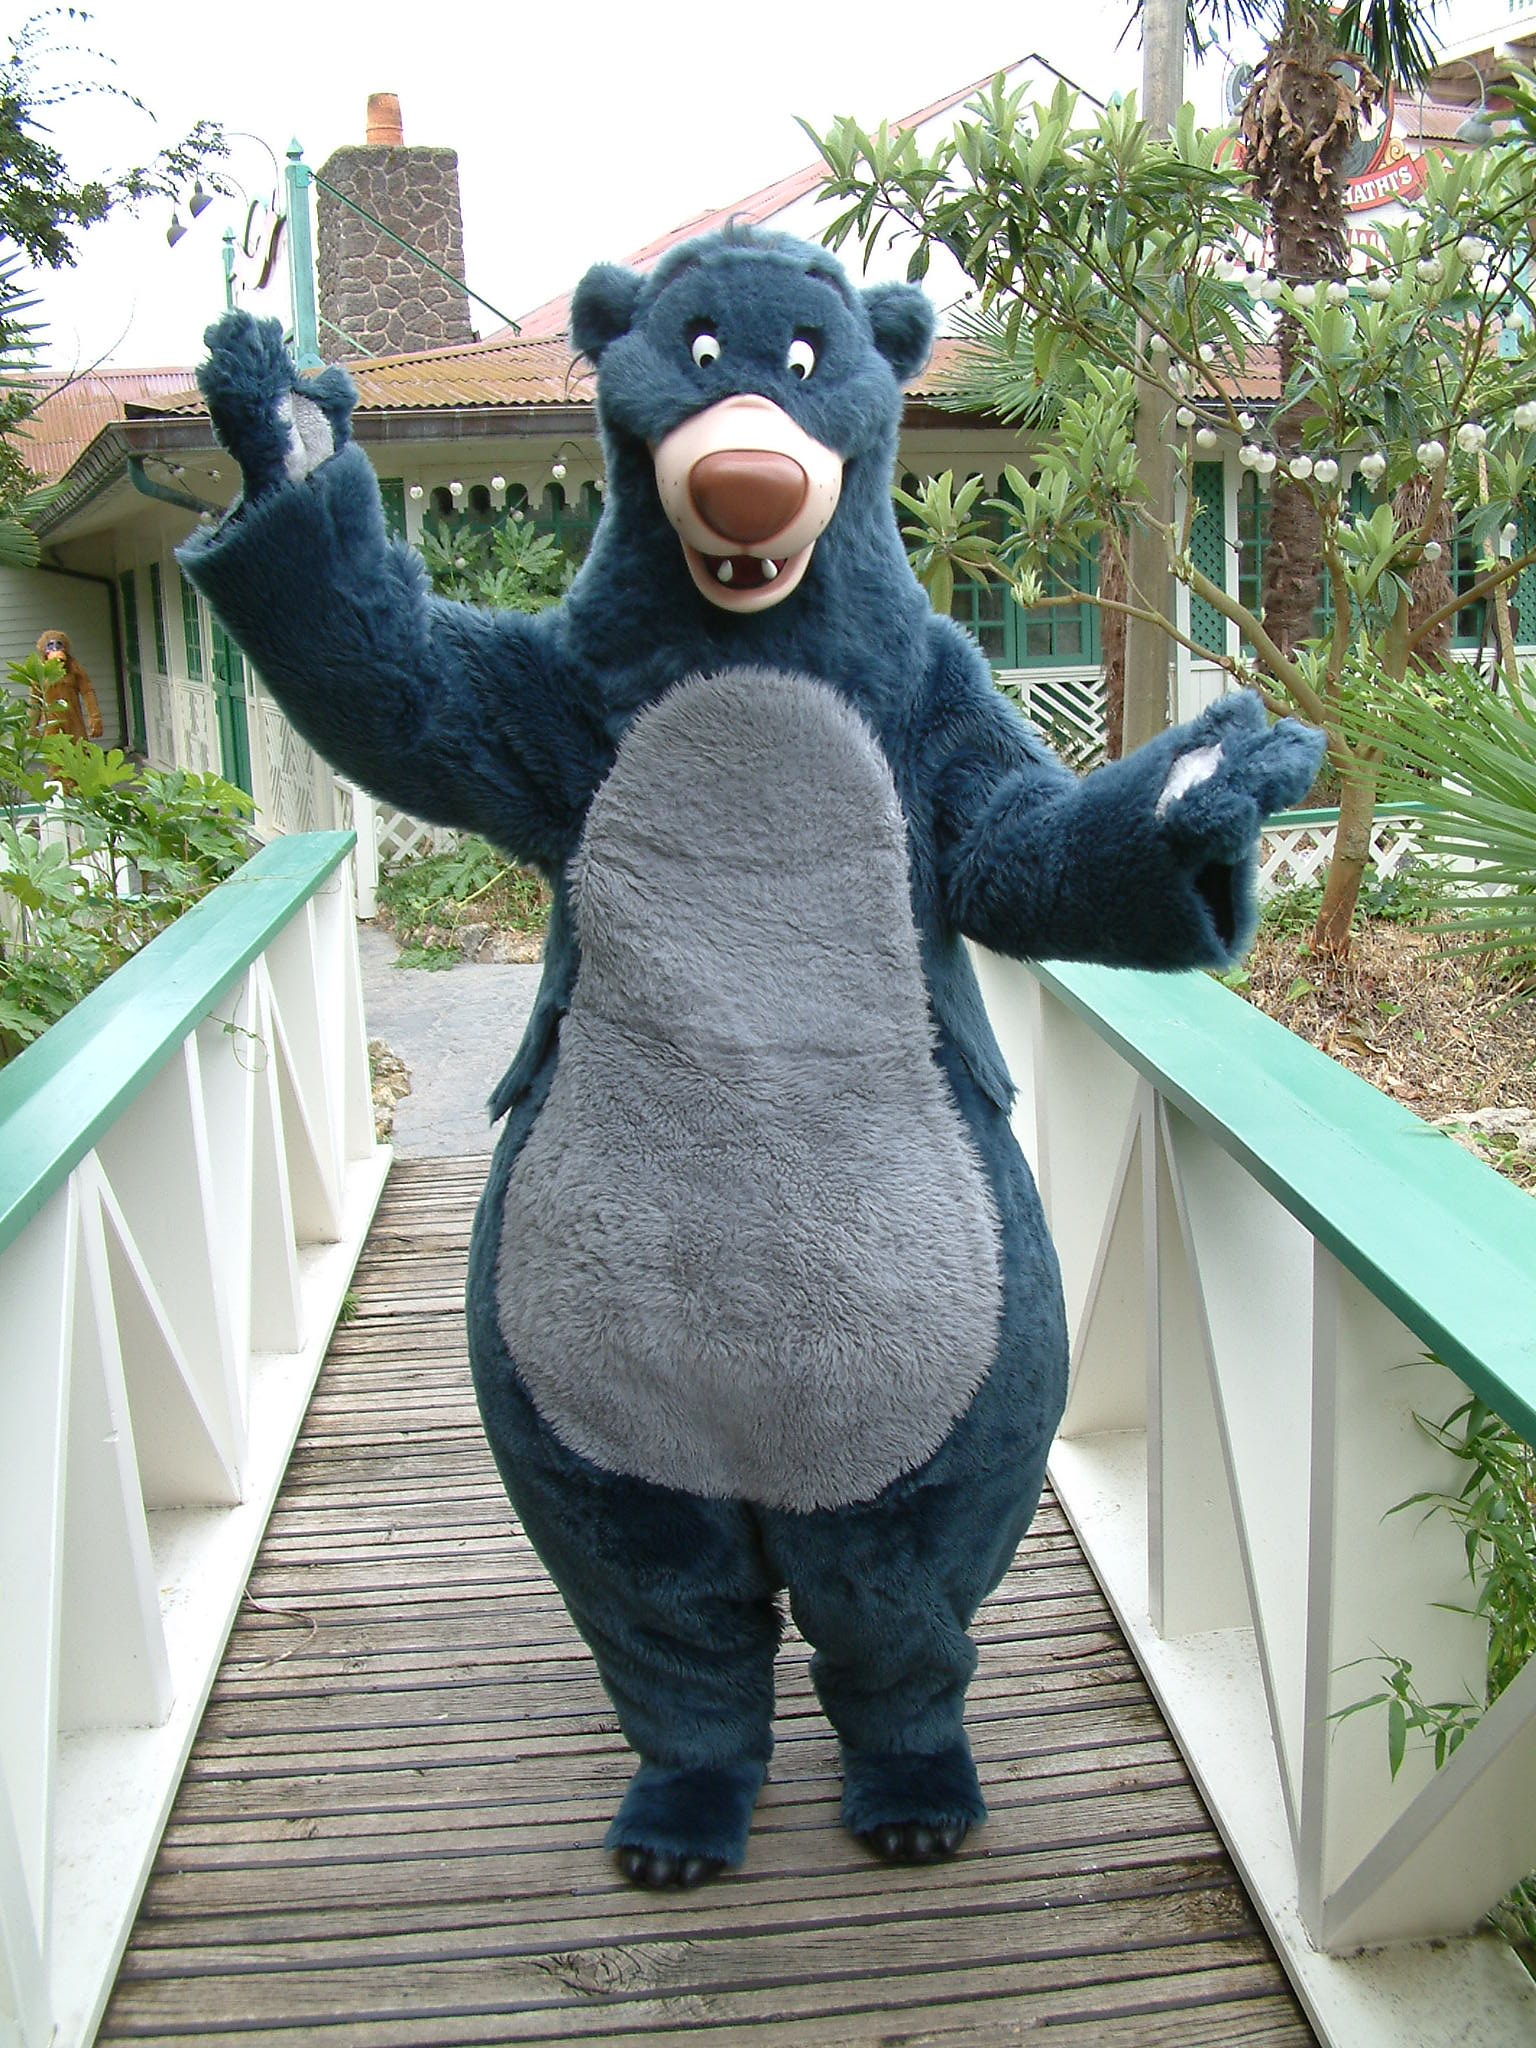 Baloo can be found most of the time in Adventureland.